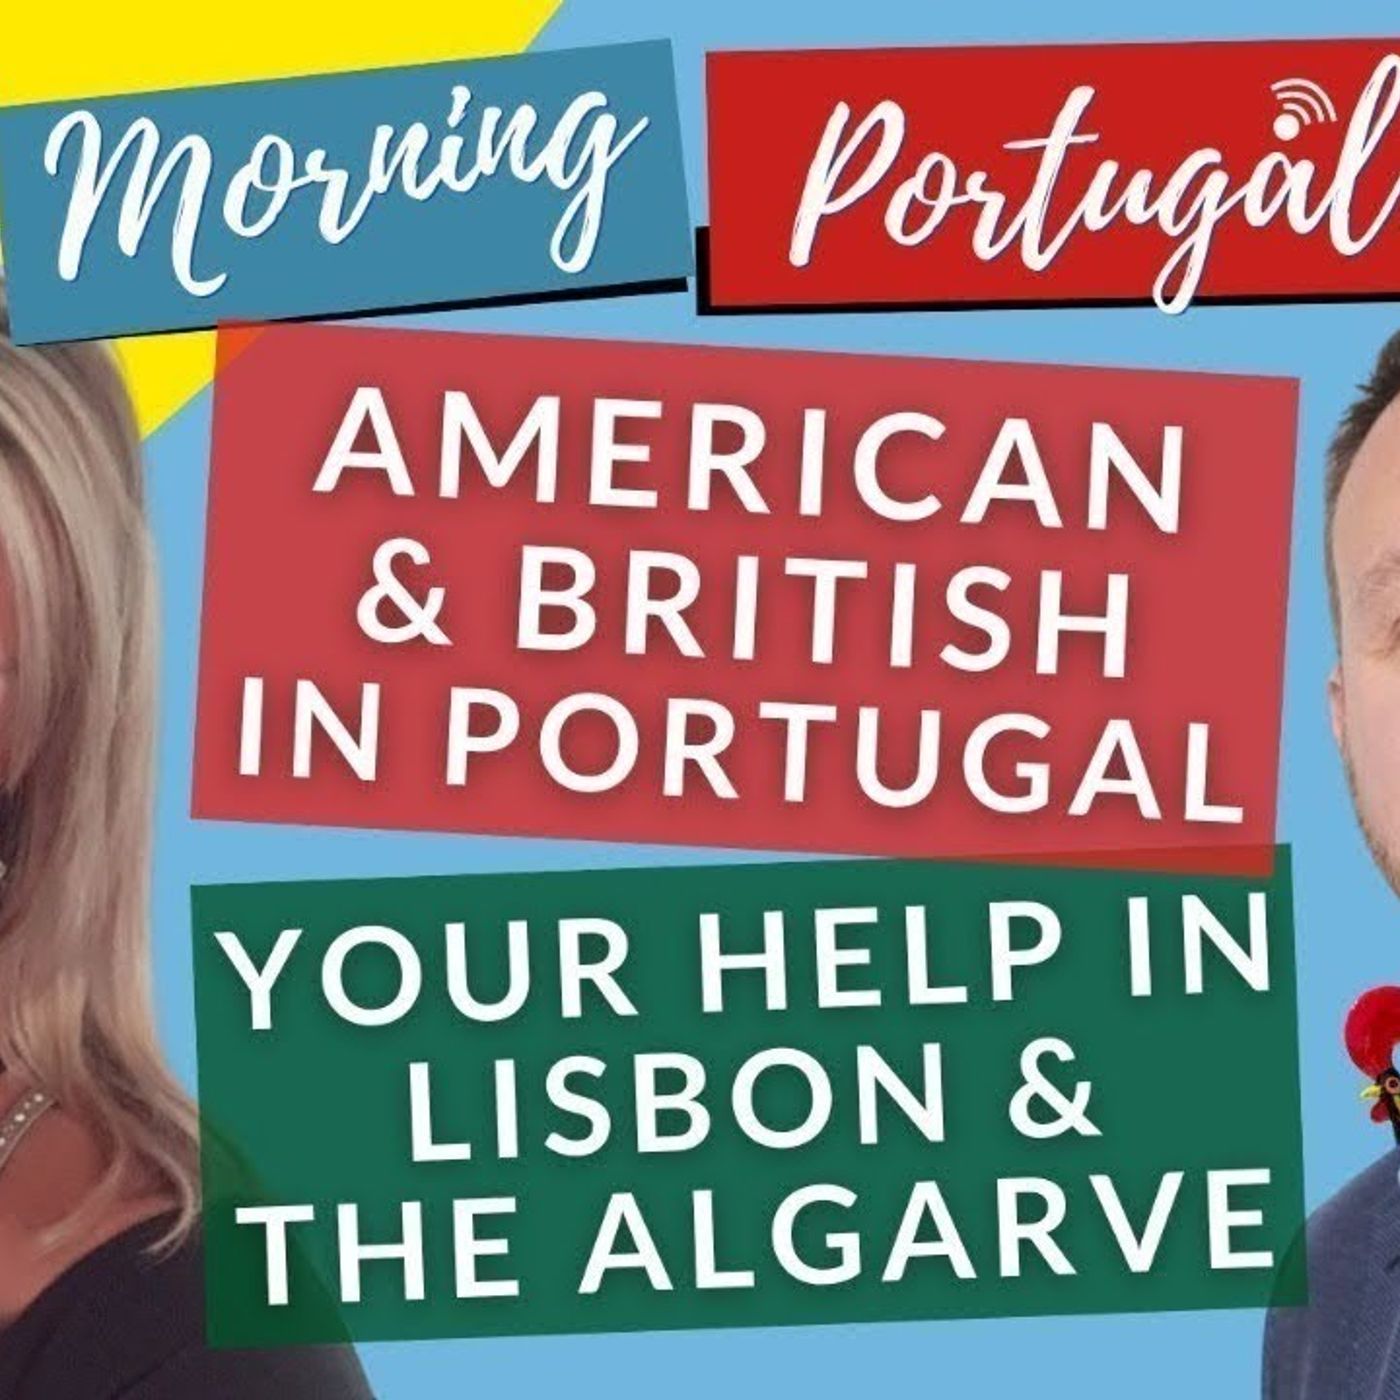 Your Home-finding HELP in Lisbon & The Algarve - US & UK Real Estate Experts on The GMP!